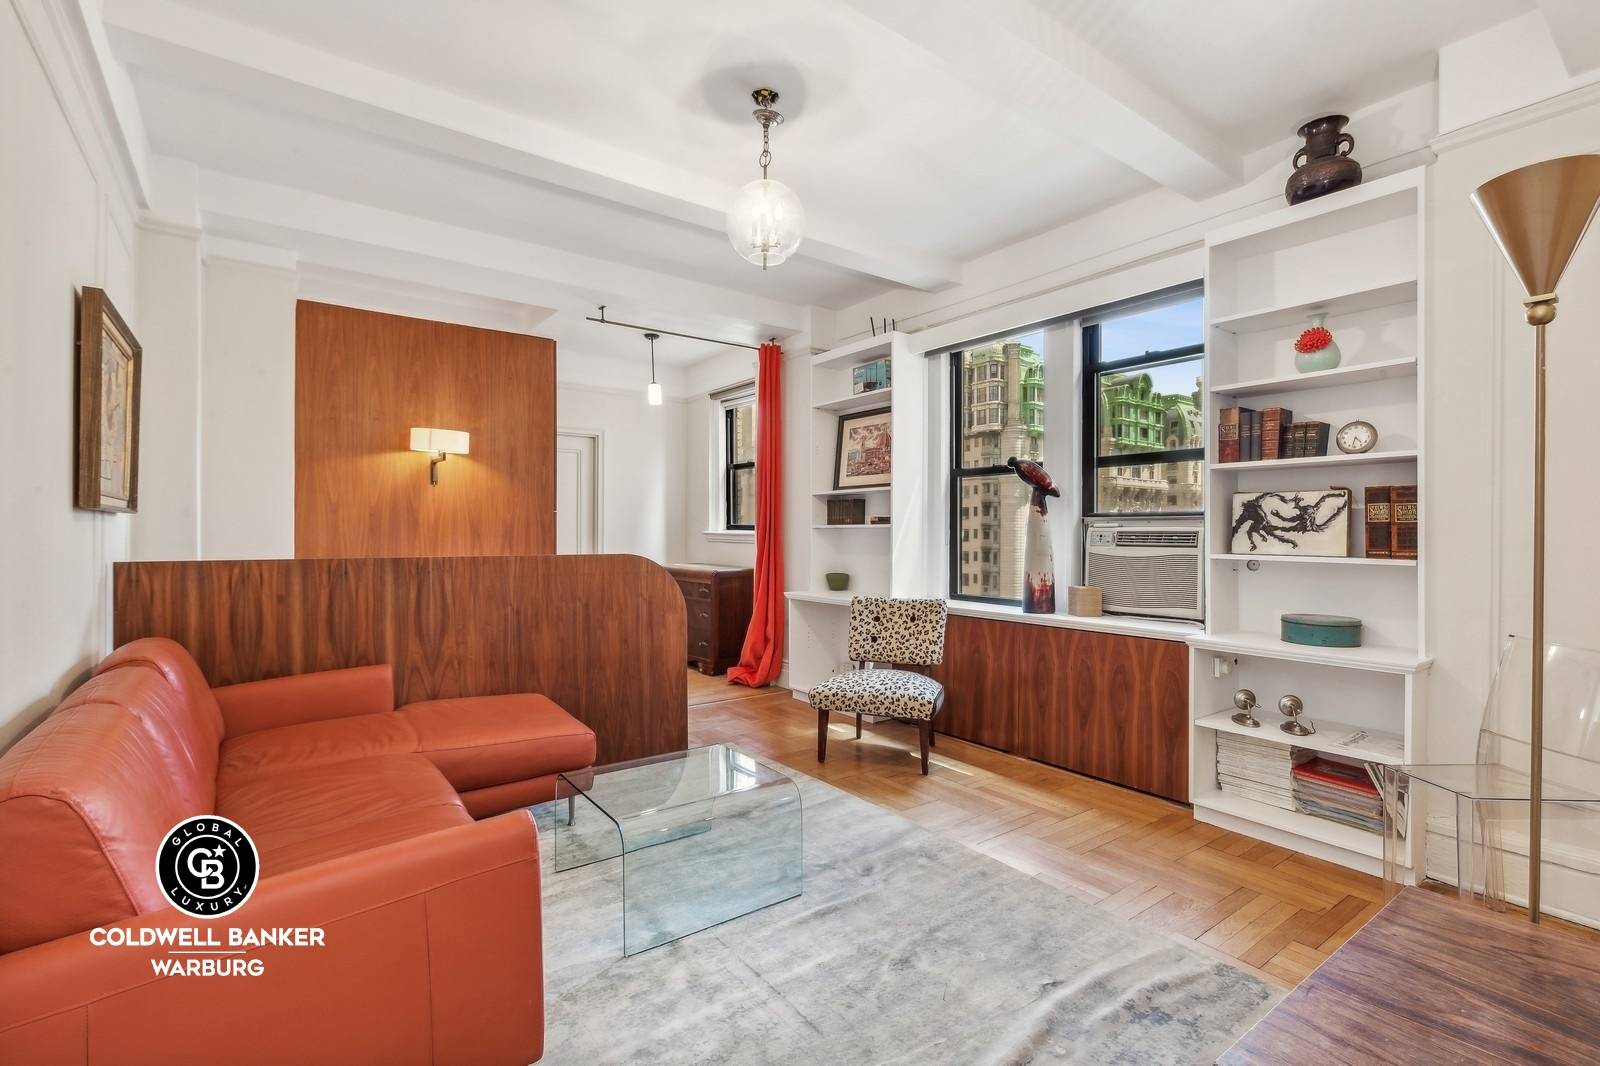 This home is a harmonious blend of classic charm, comfort, and location in the heart of the Upper West Side.